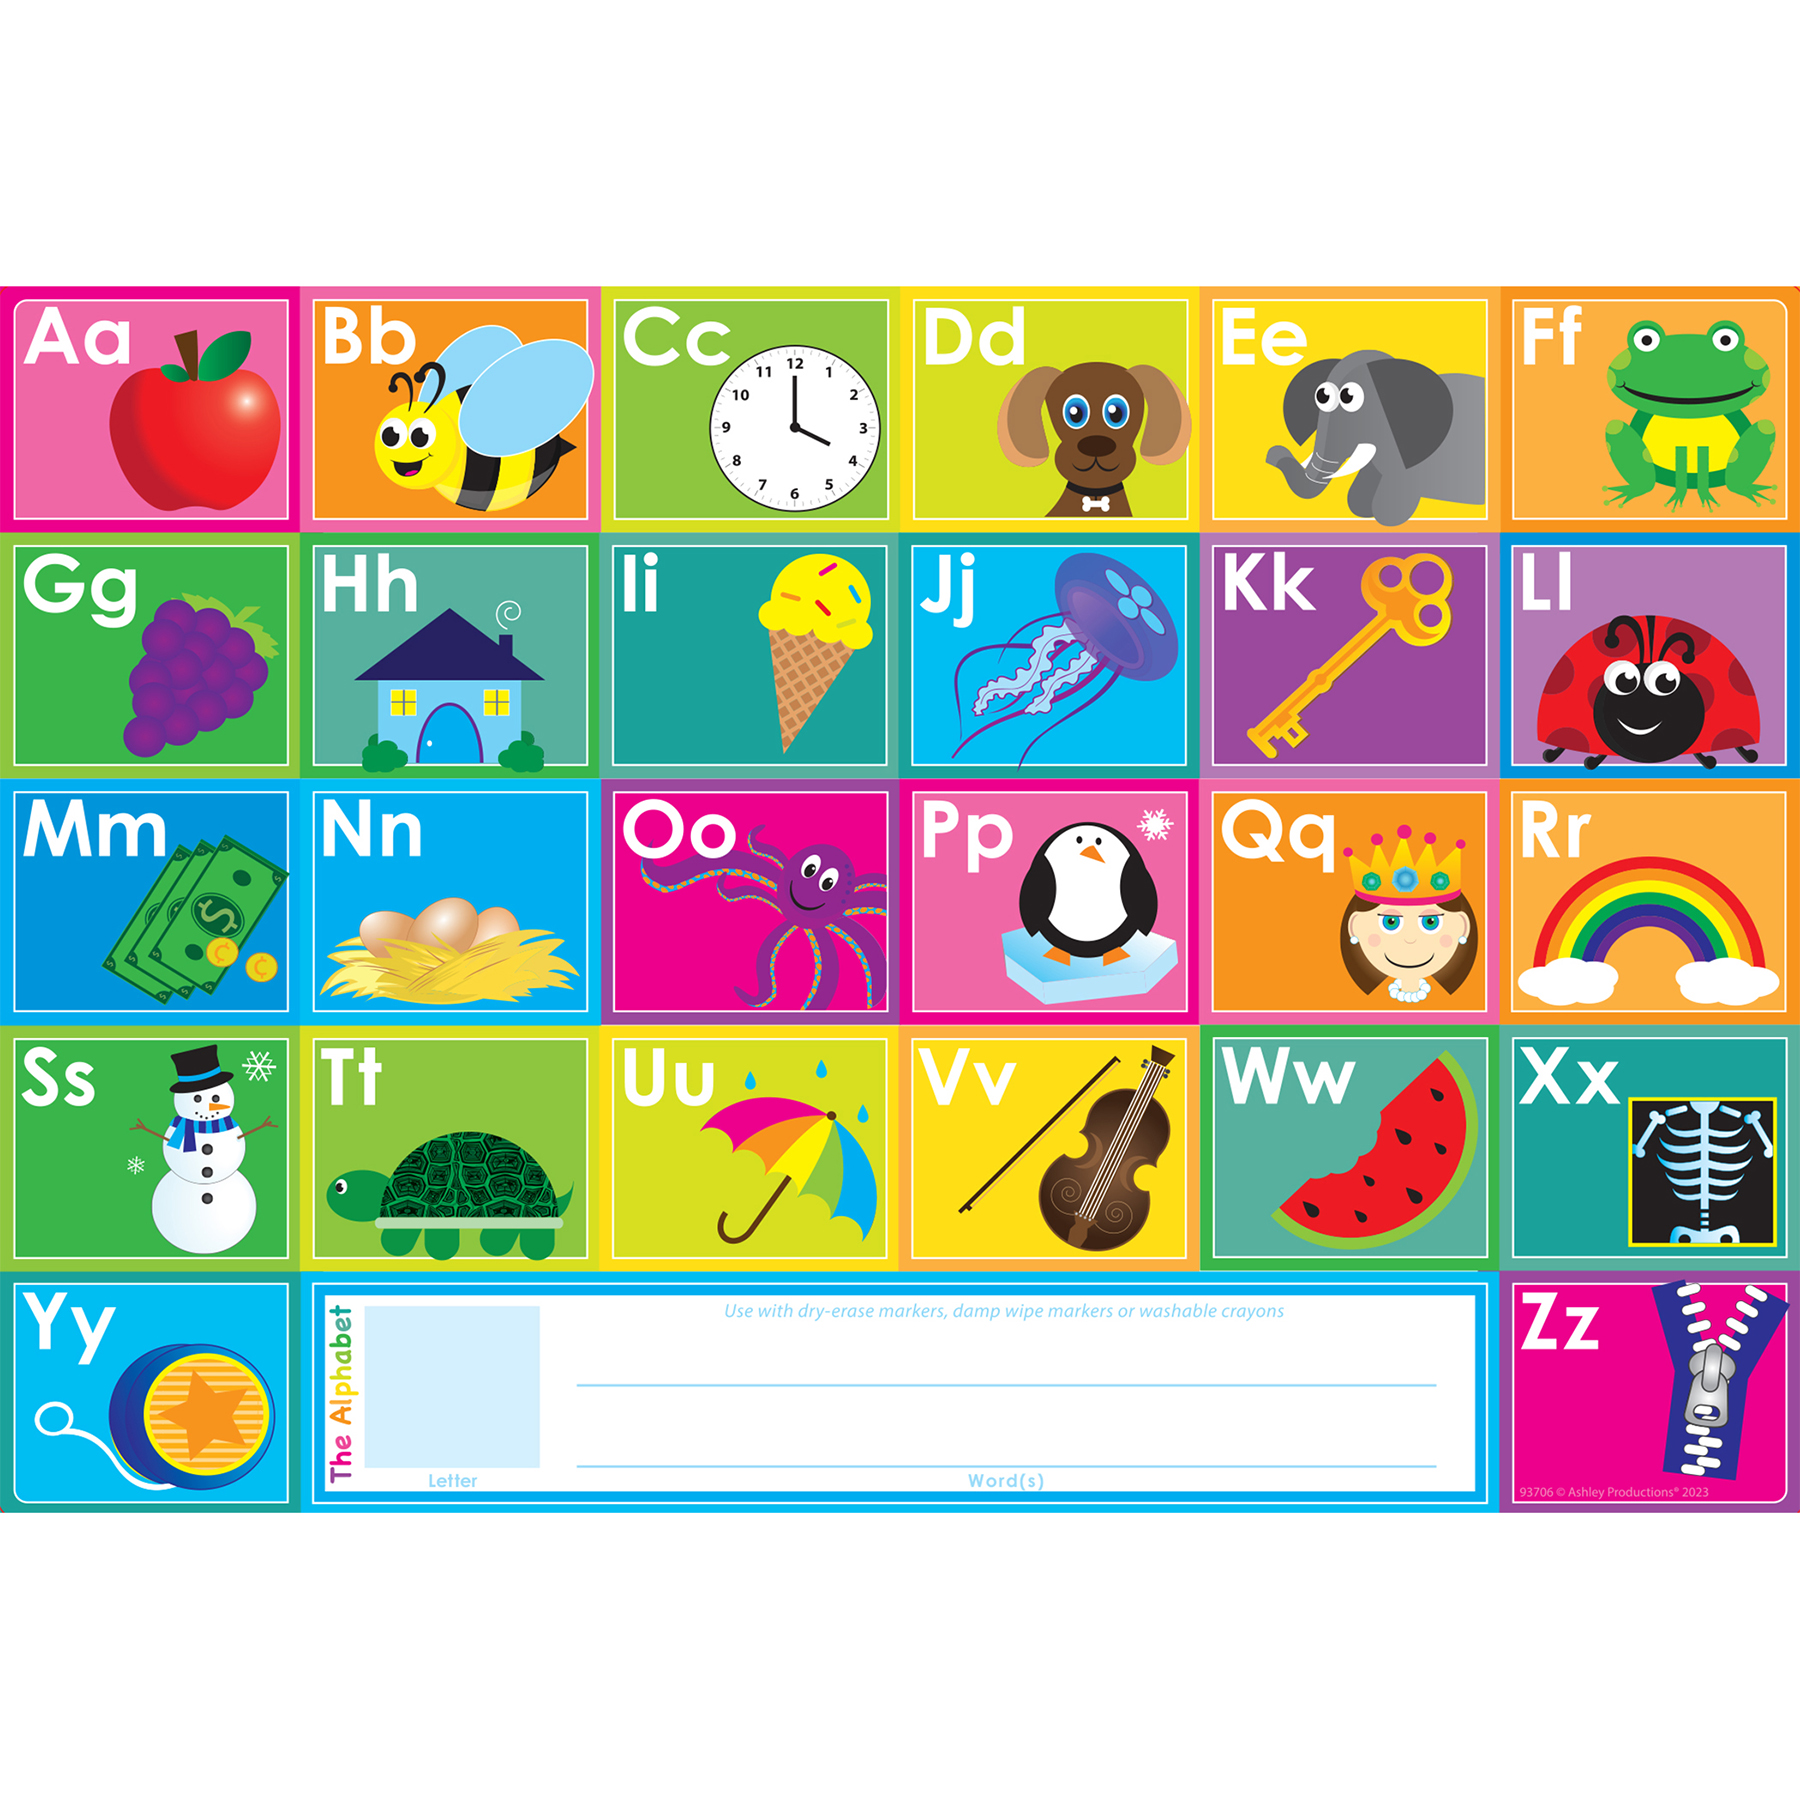 Ashley Productions Placemat Studio Smart Poly ABC's Learning Placemat, 13" x 19", Single Sided, Pack of 10 image number null